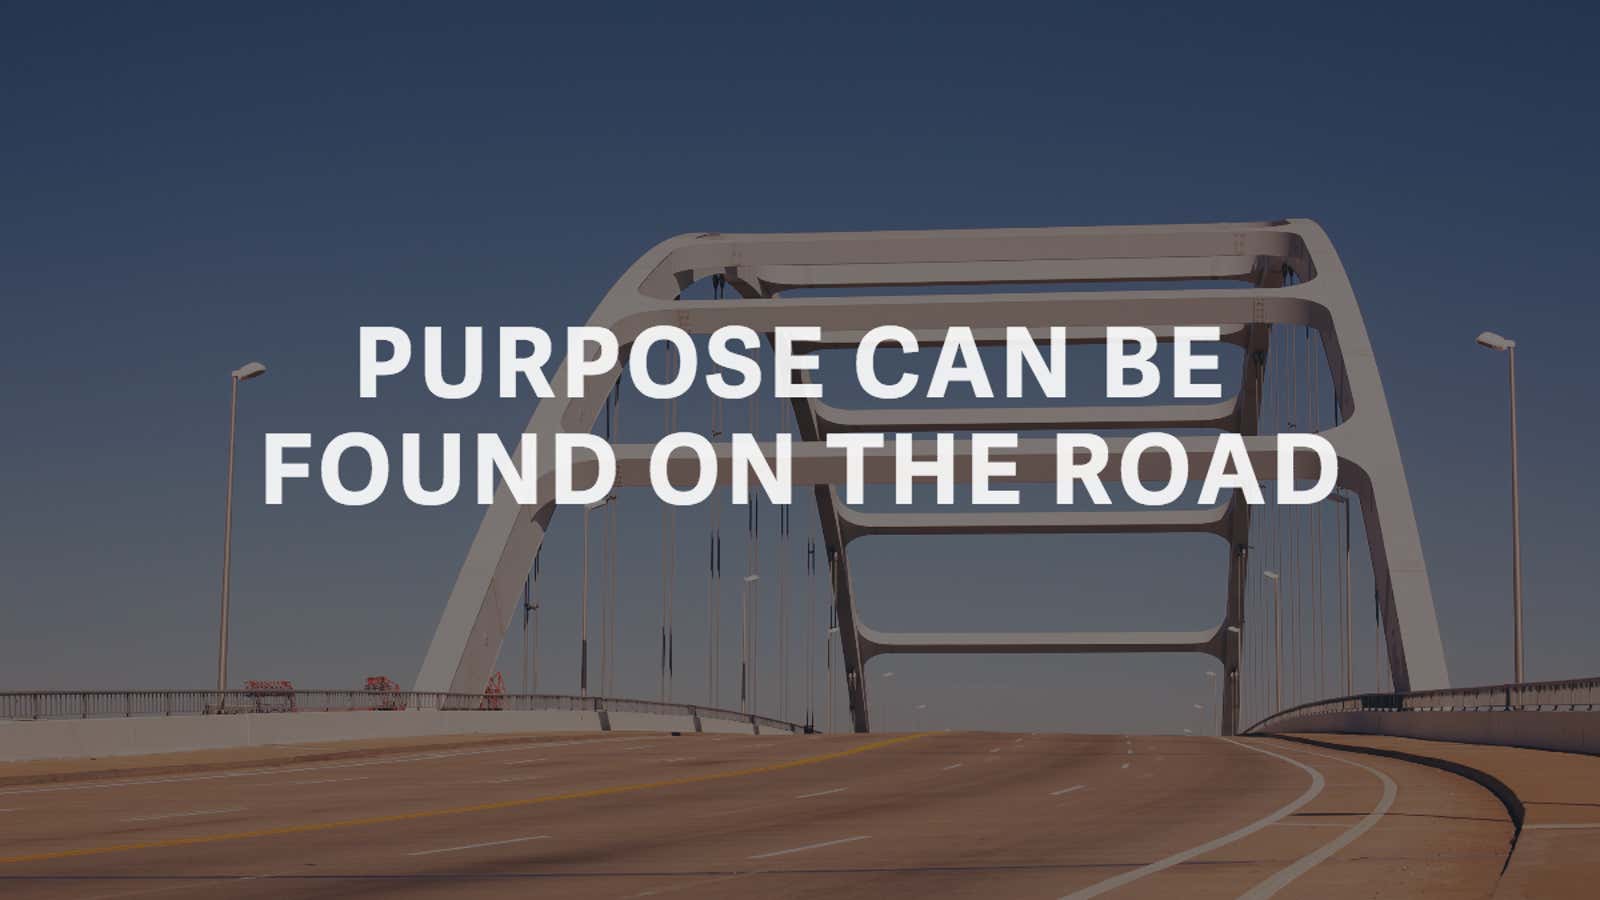 Are you seeking your business’ purpose in the right places?